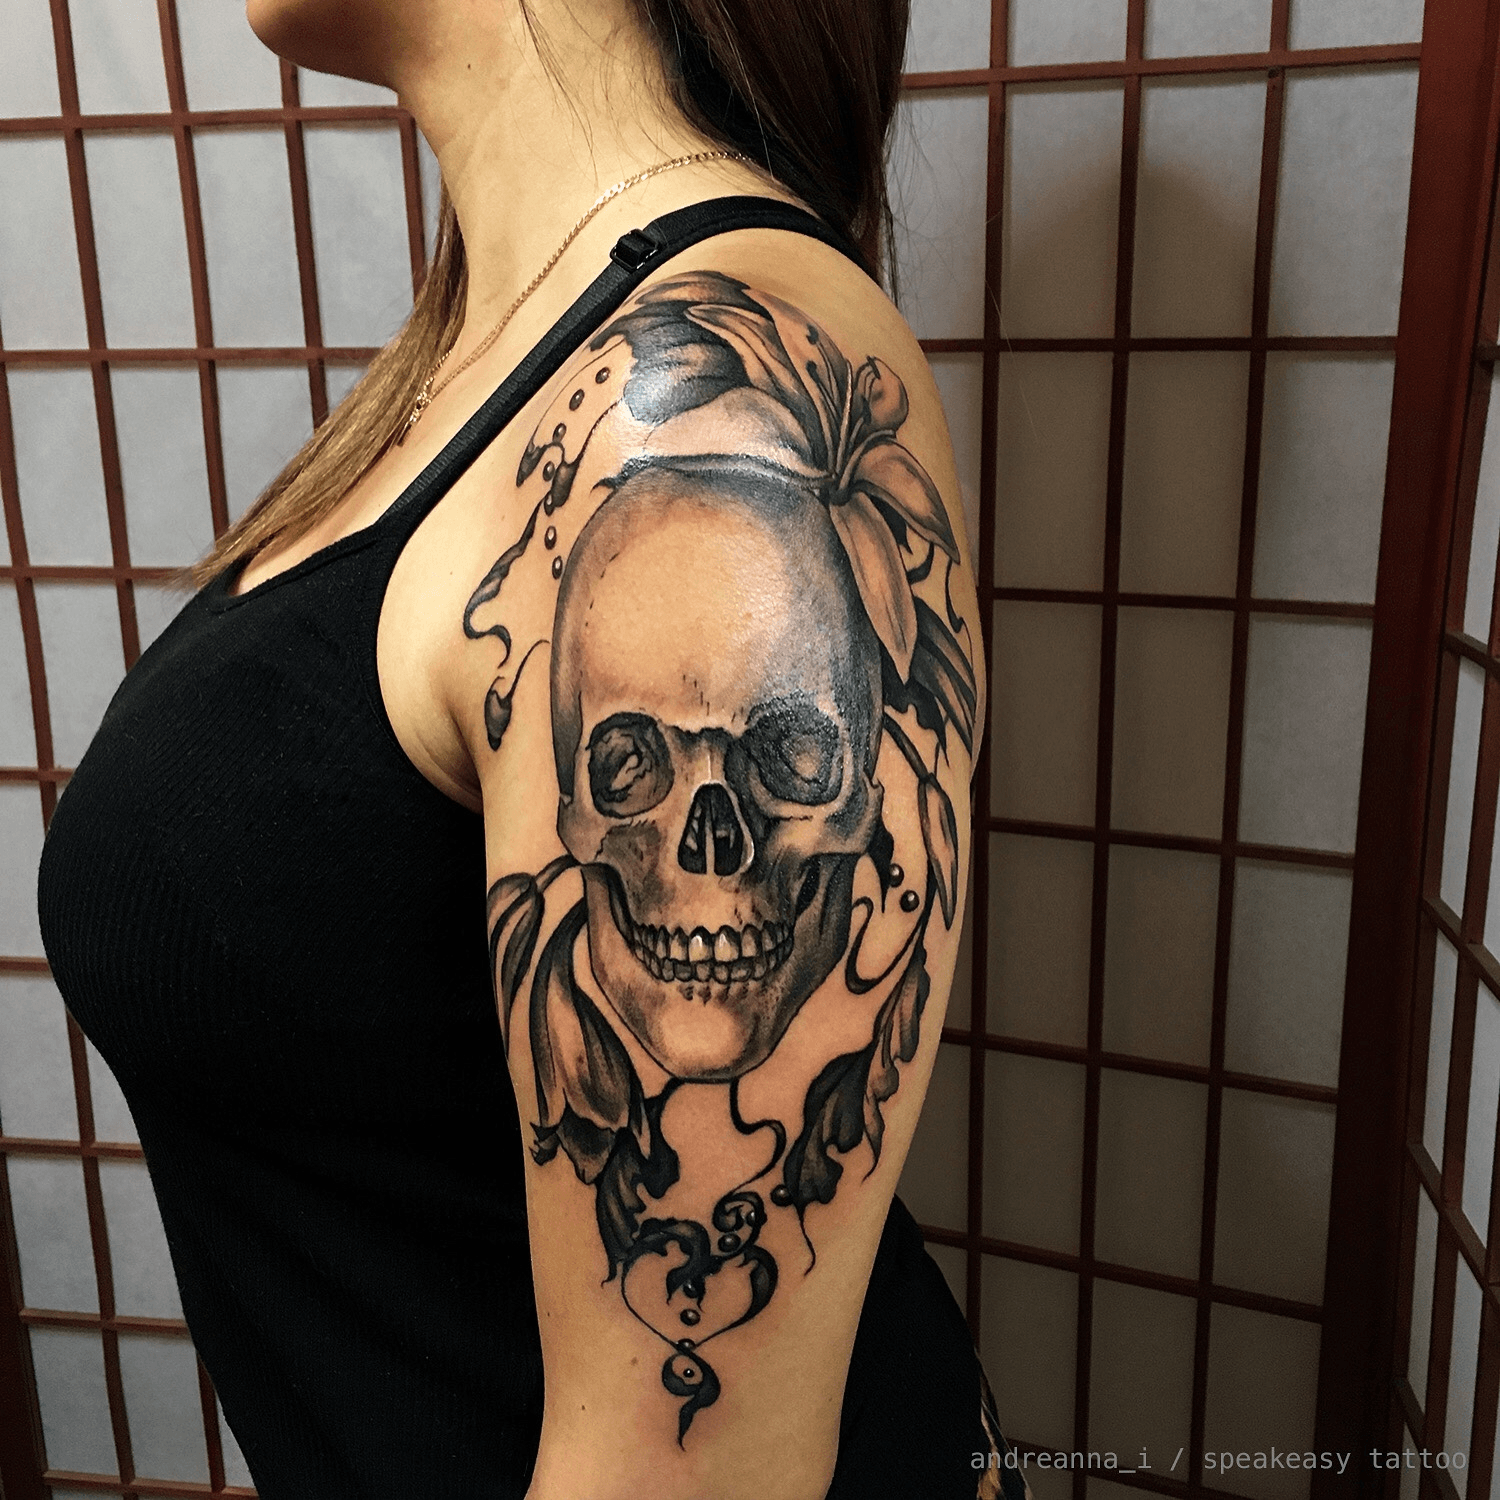 100 Awesome Skull Tattoo Designs  Art and Design  Skull sleeve tattoos Skull  tattoo design Skull tattoos